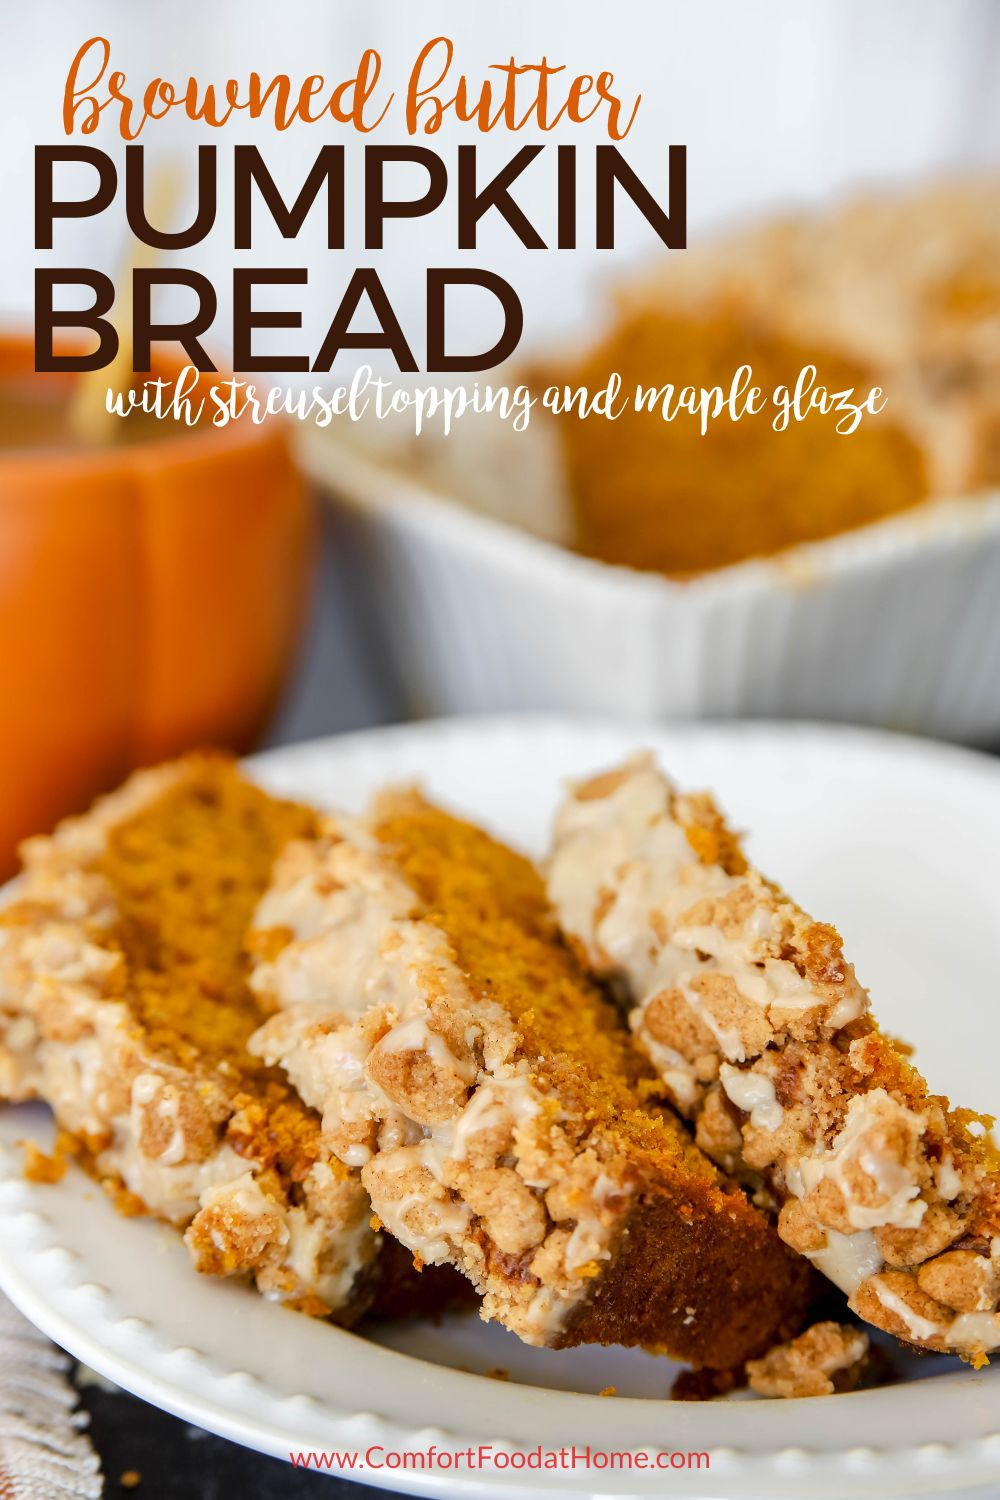 Browned Butter Pumpkin Bread with Streusel topping and maple glaze recipe